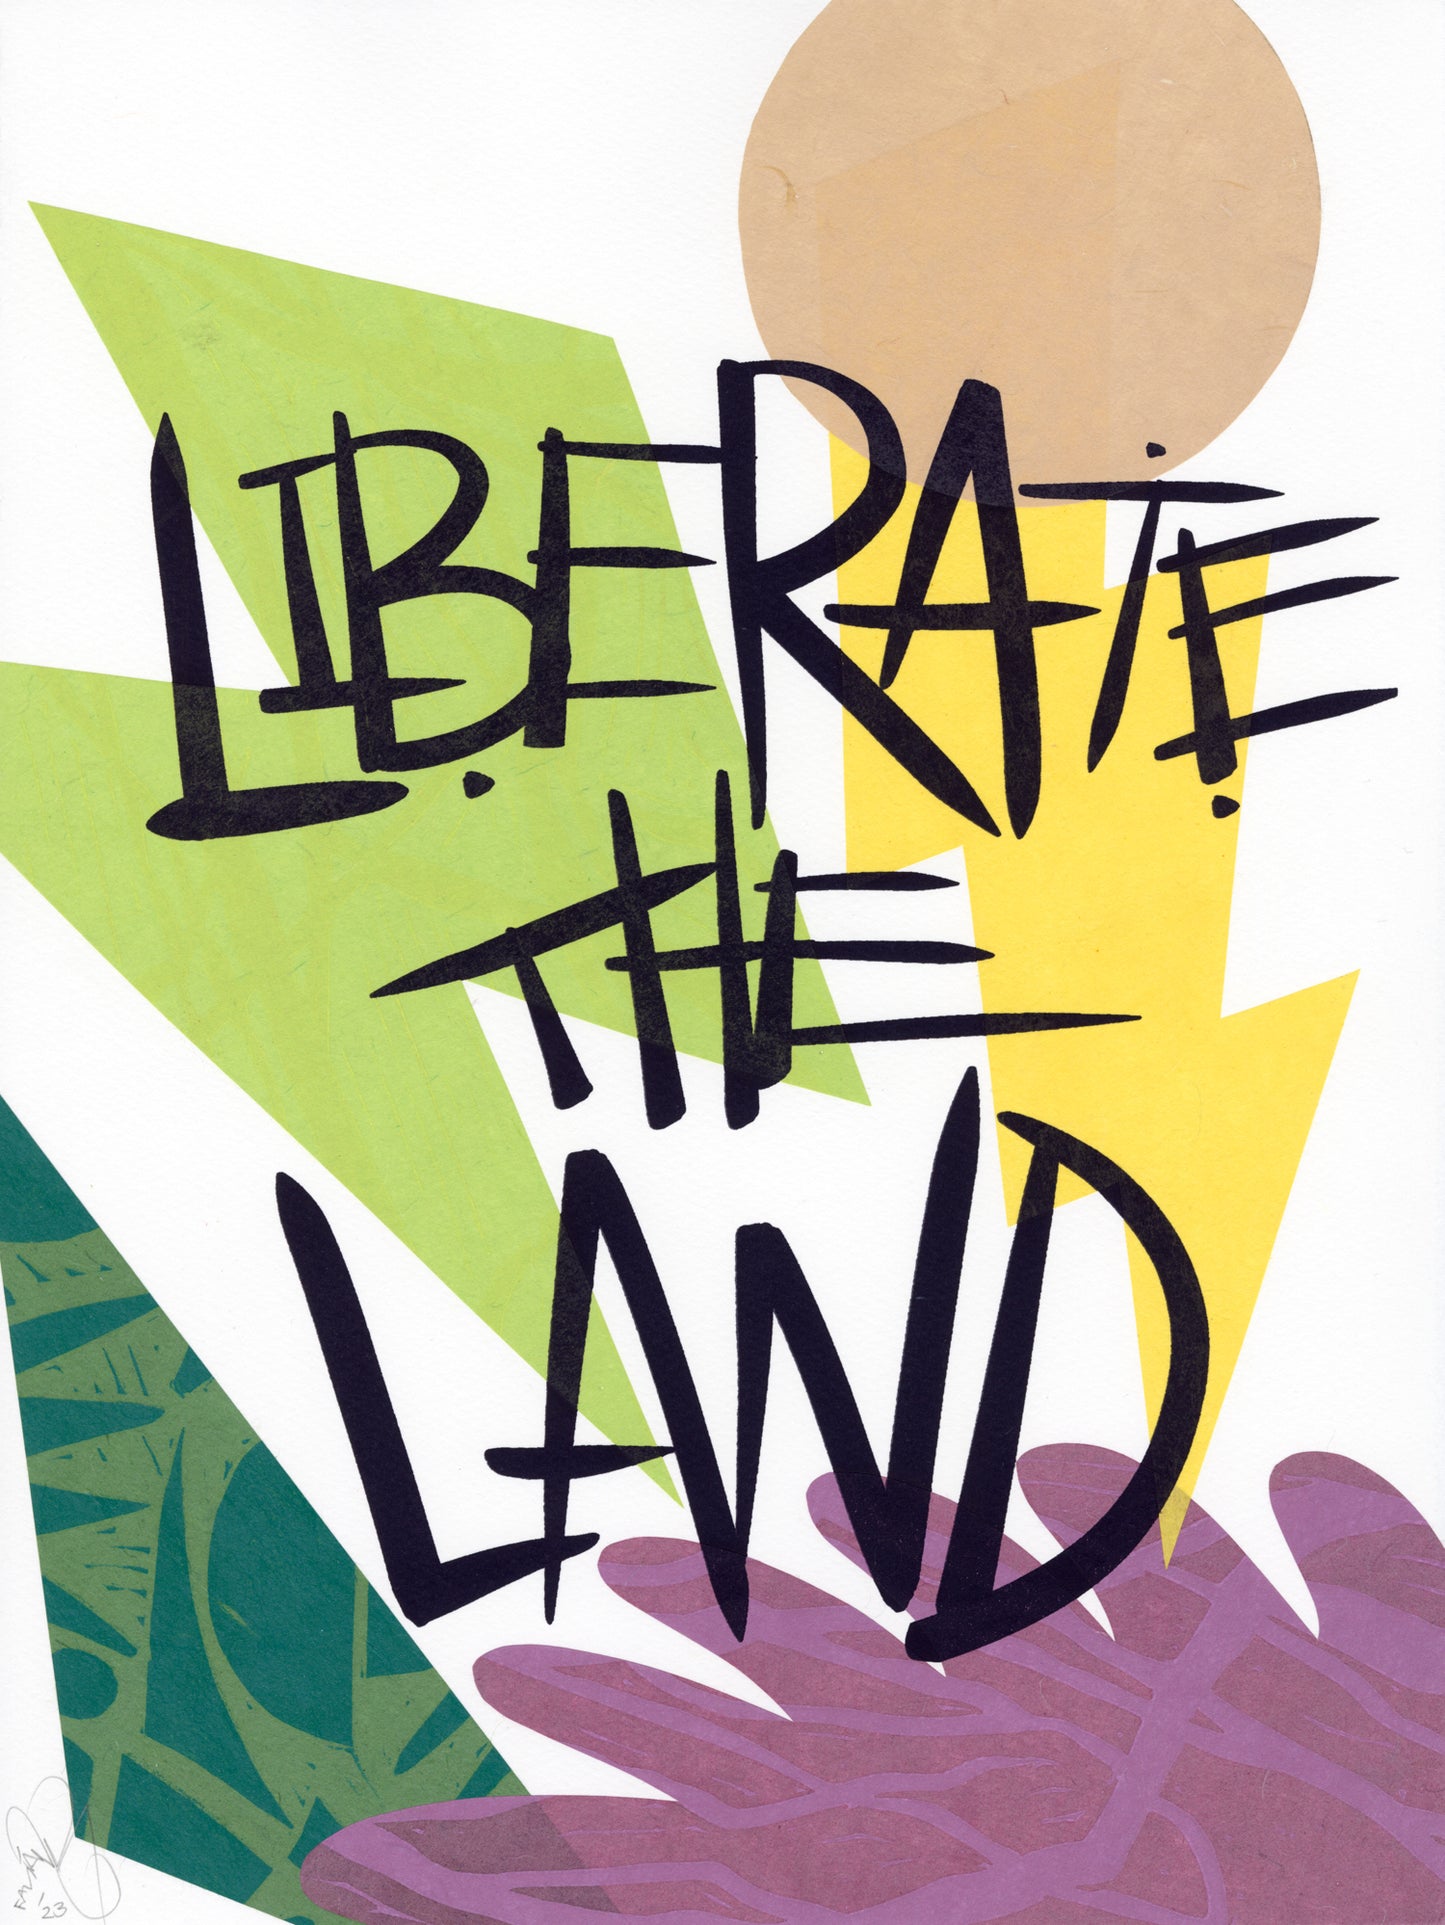 Liberate The Land 26